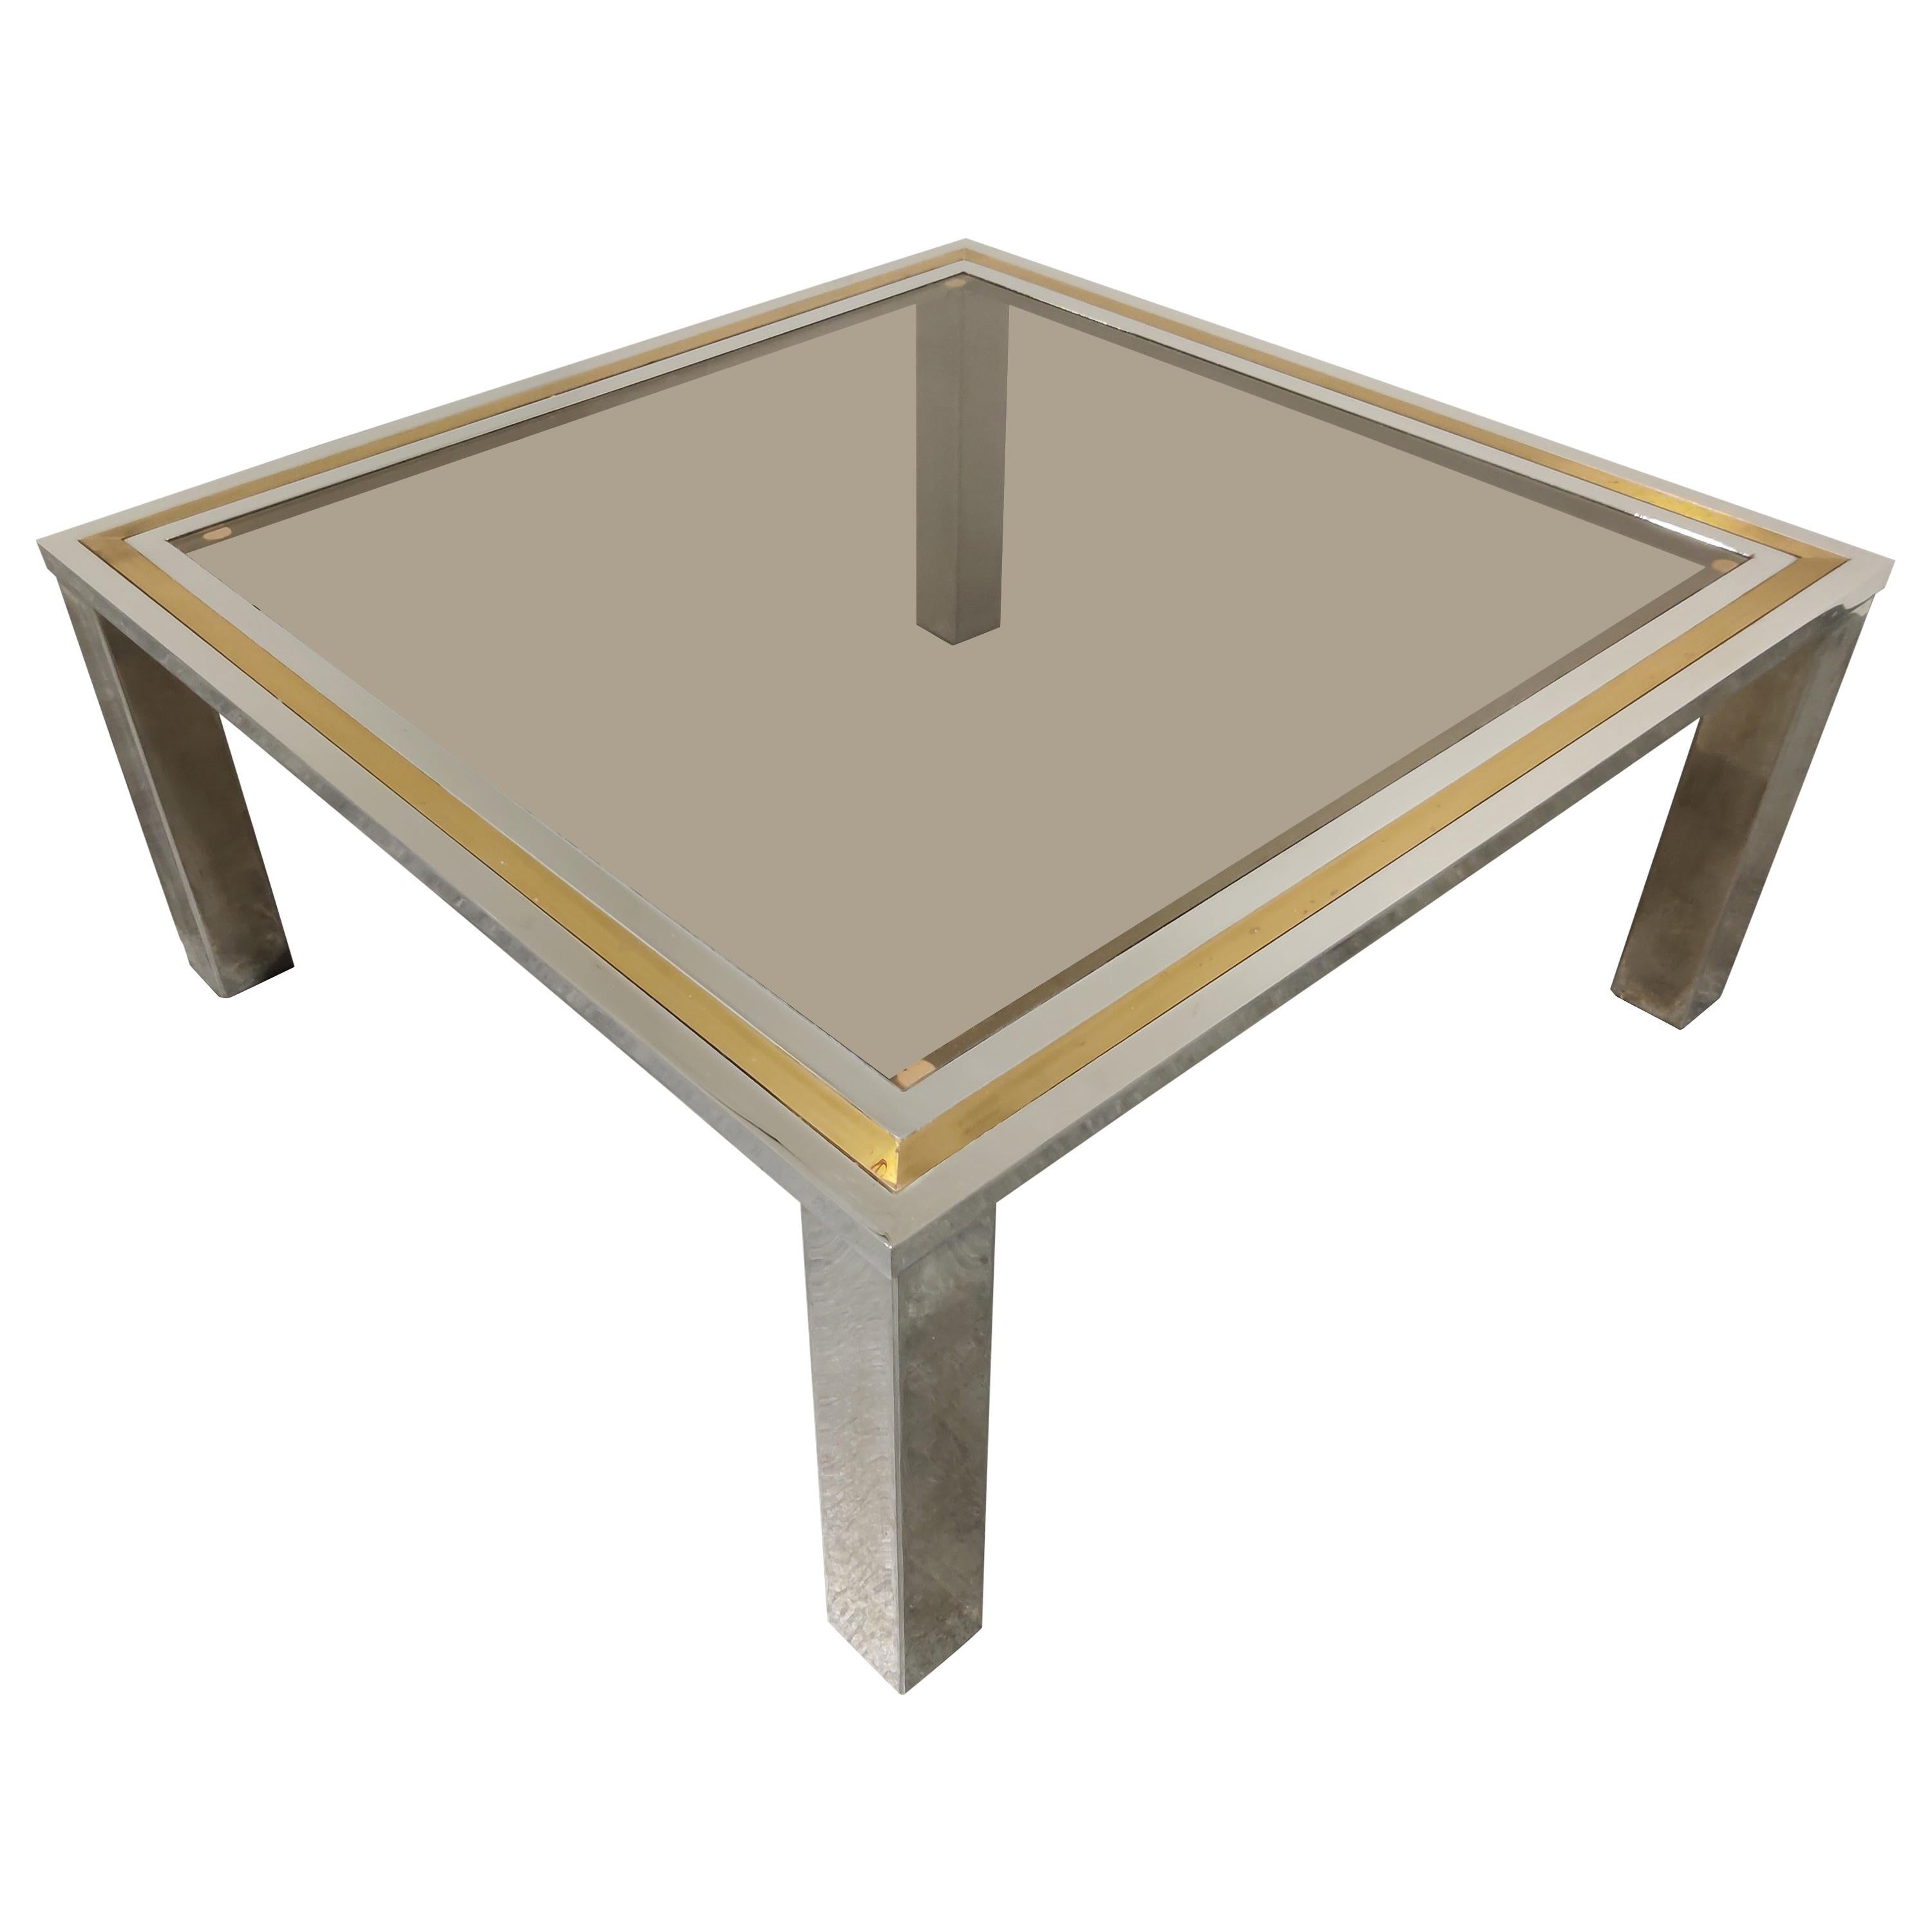 Vintage Chrome and Brass Coffee Table, 1970s For Sale